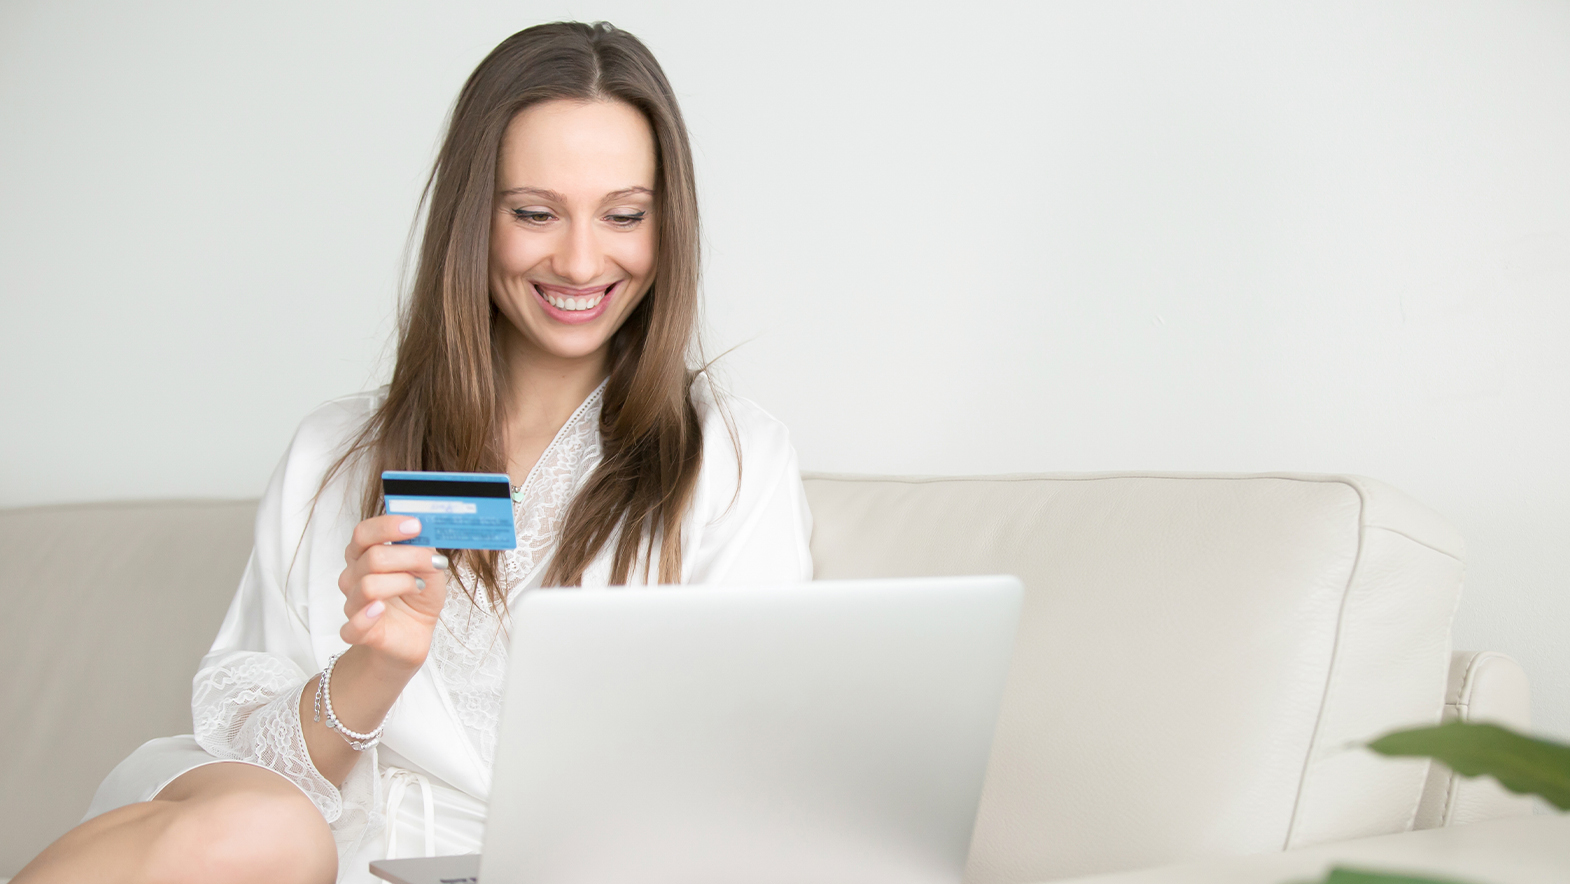 GETTING A CREDIT CARD ONLINE